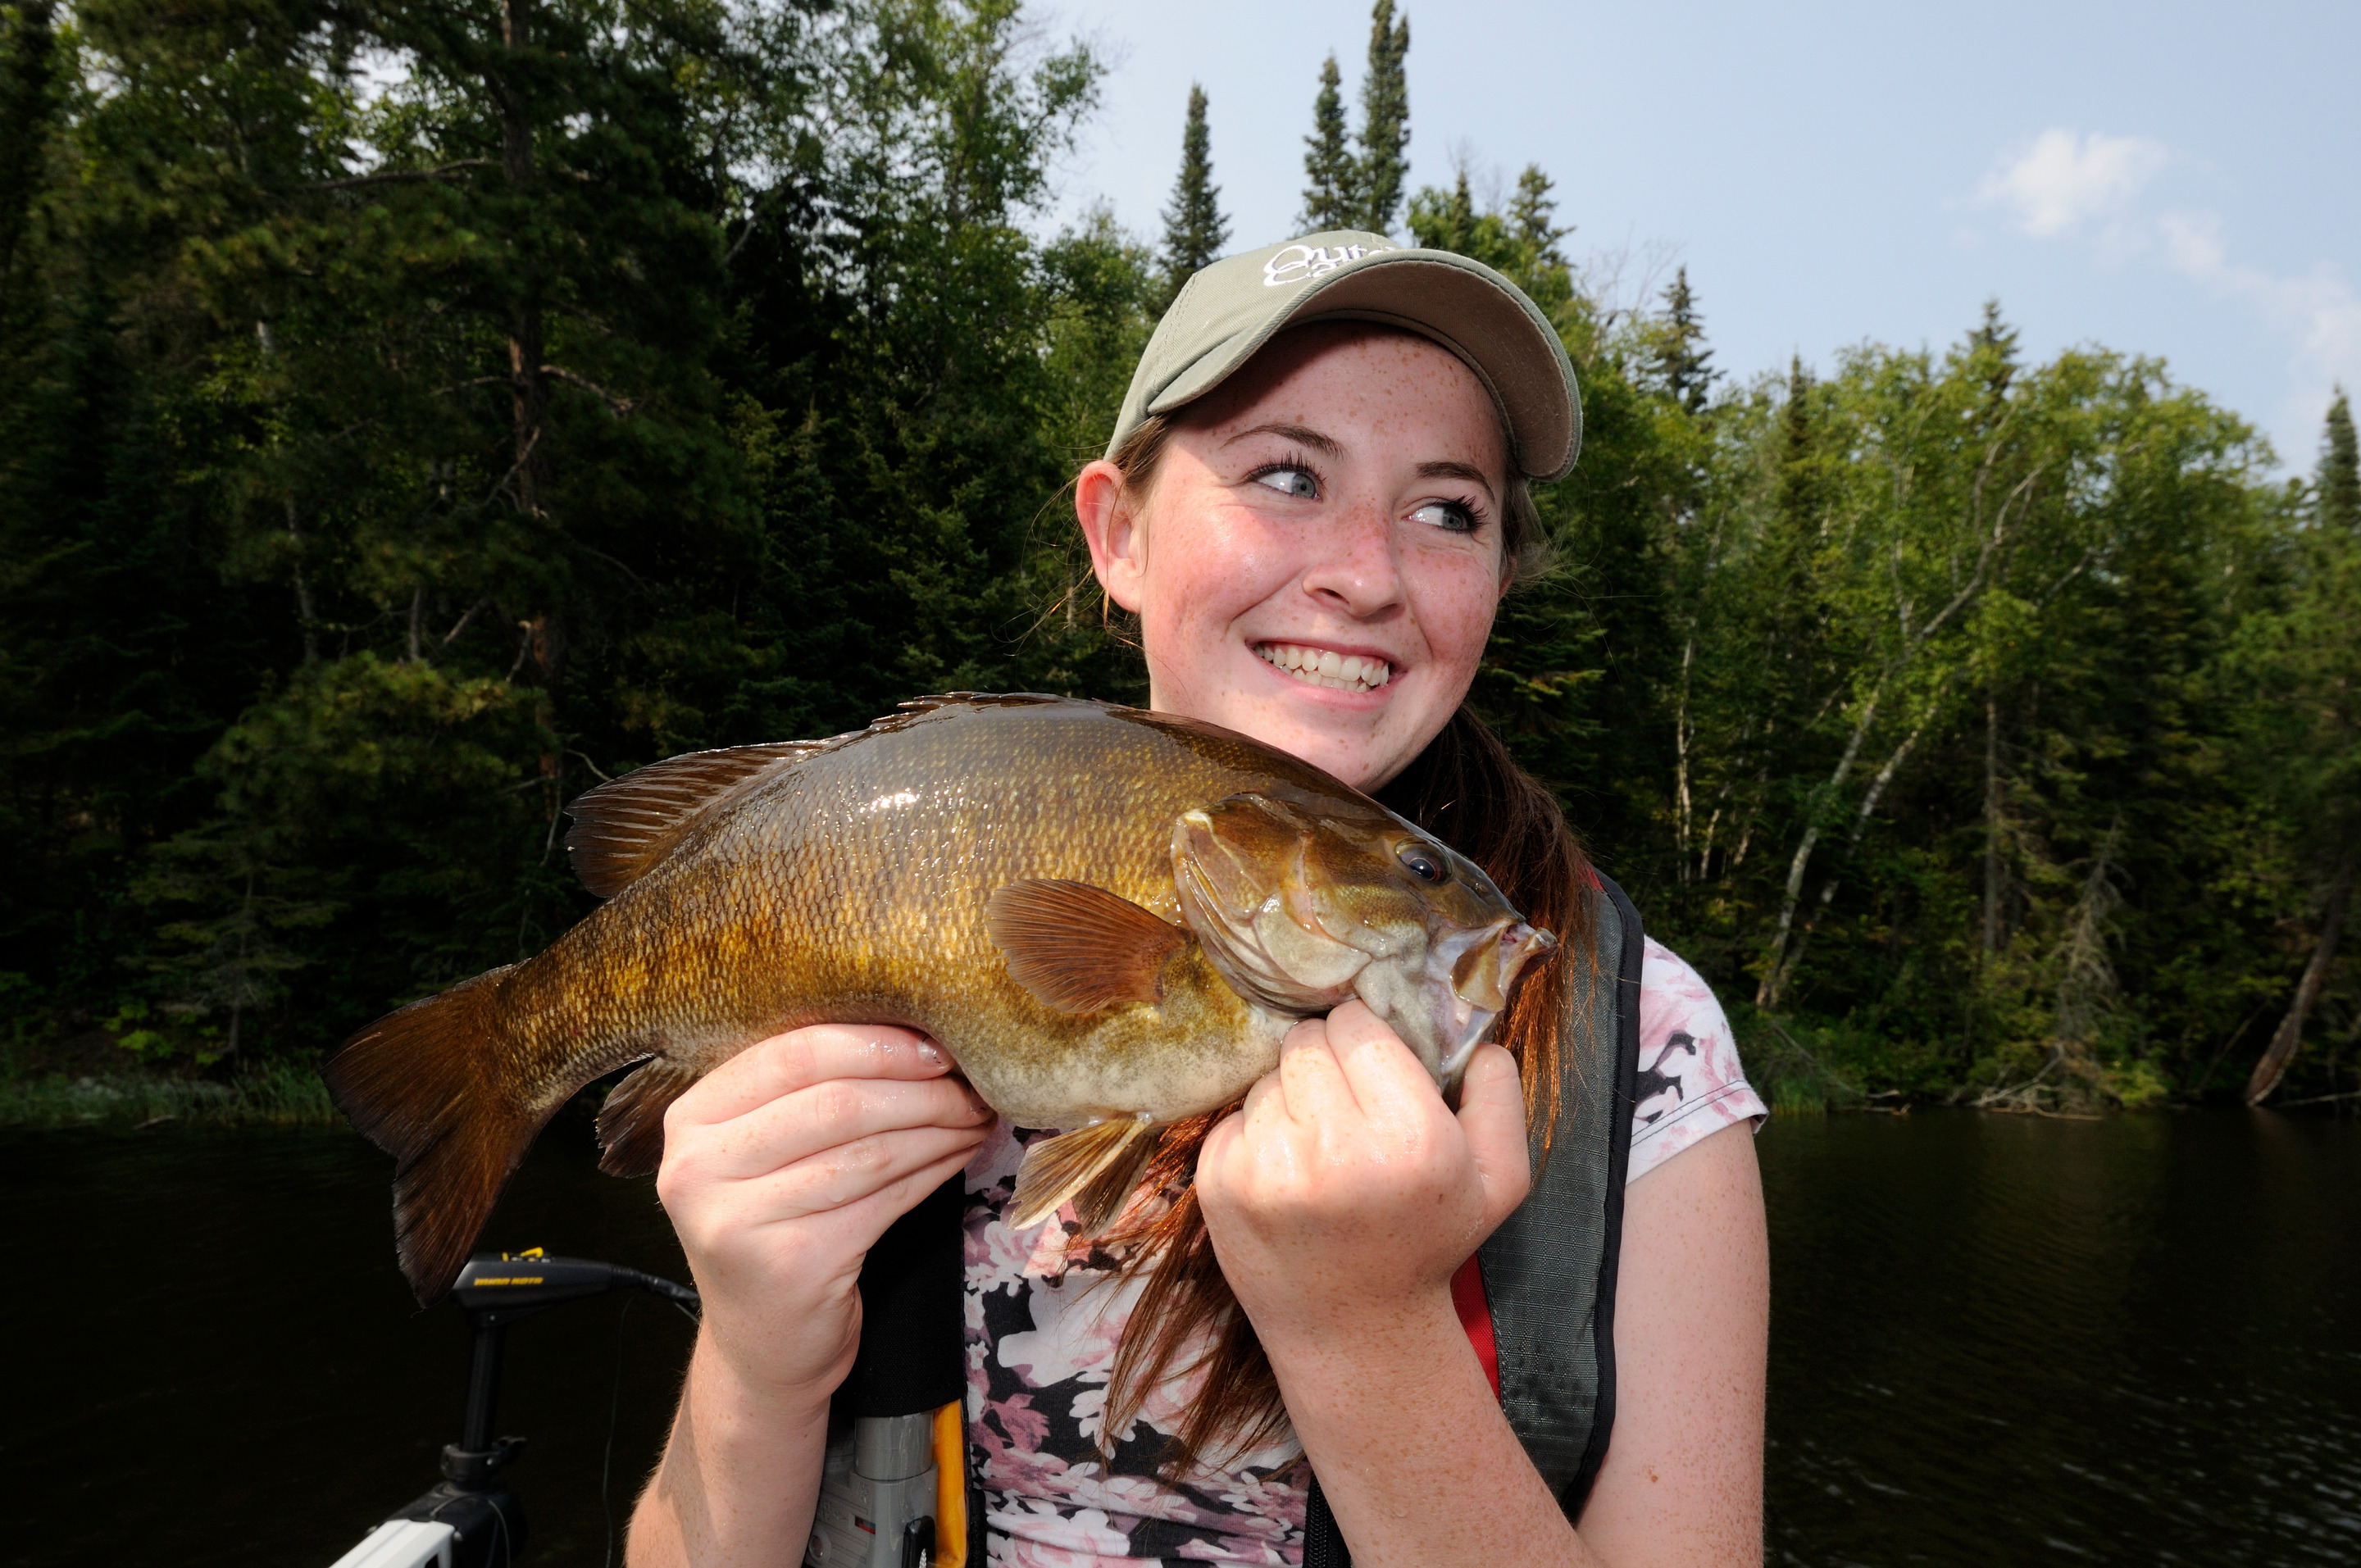 Top 5 Fish Species to Fish for in Northeastern Ontario